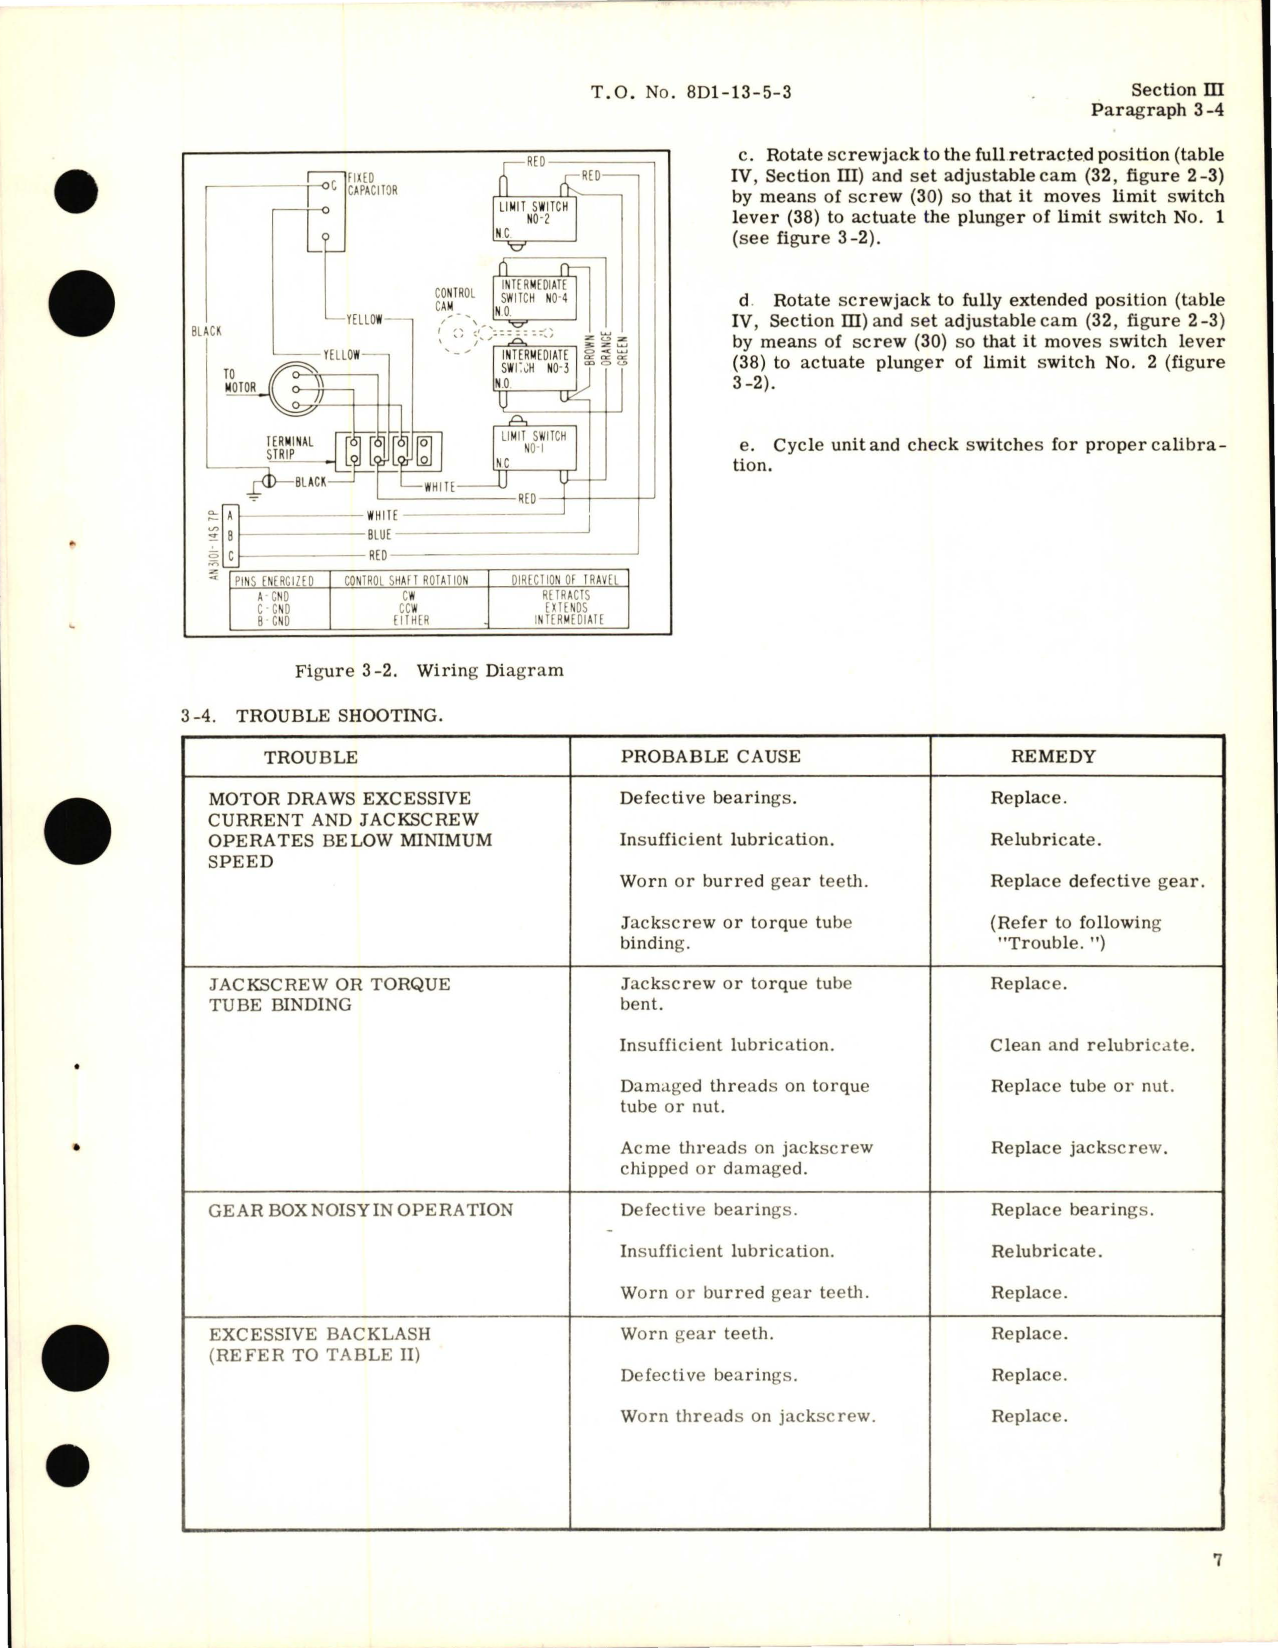 Sample page 9 from AirCorps Library document: Overhaul Instructions for Linear Actuator Assembly 477 Series